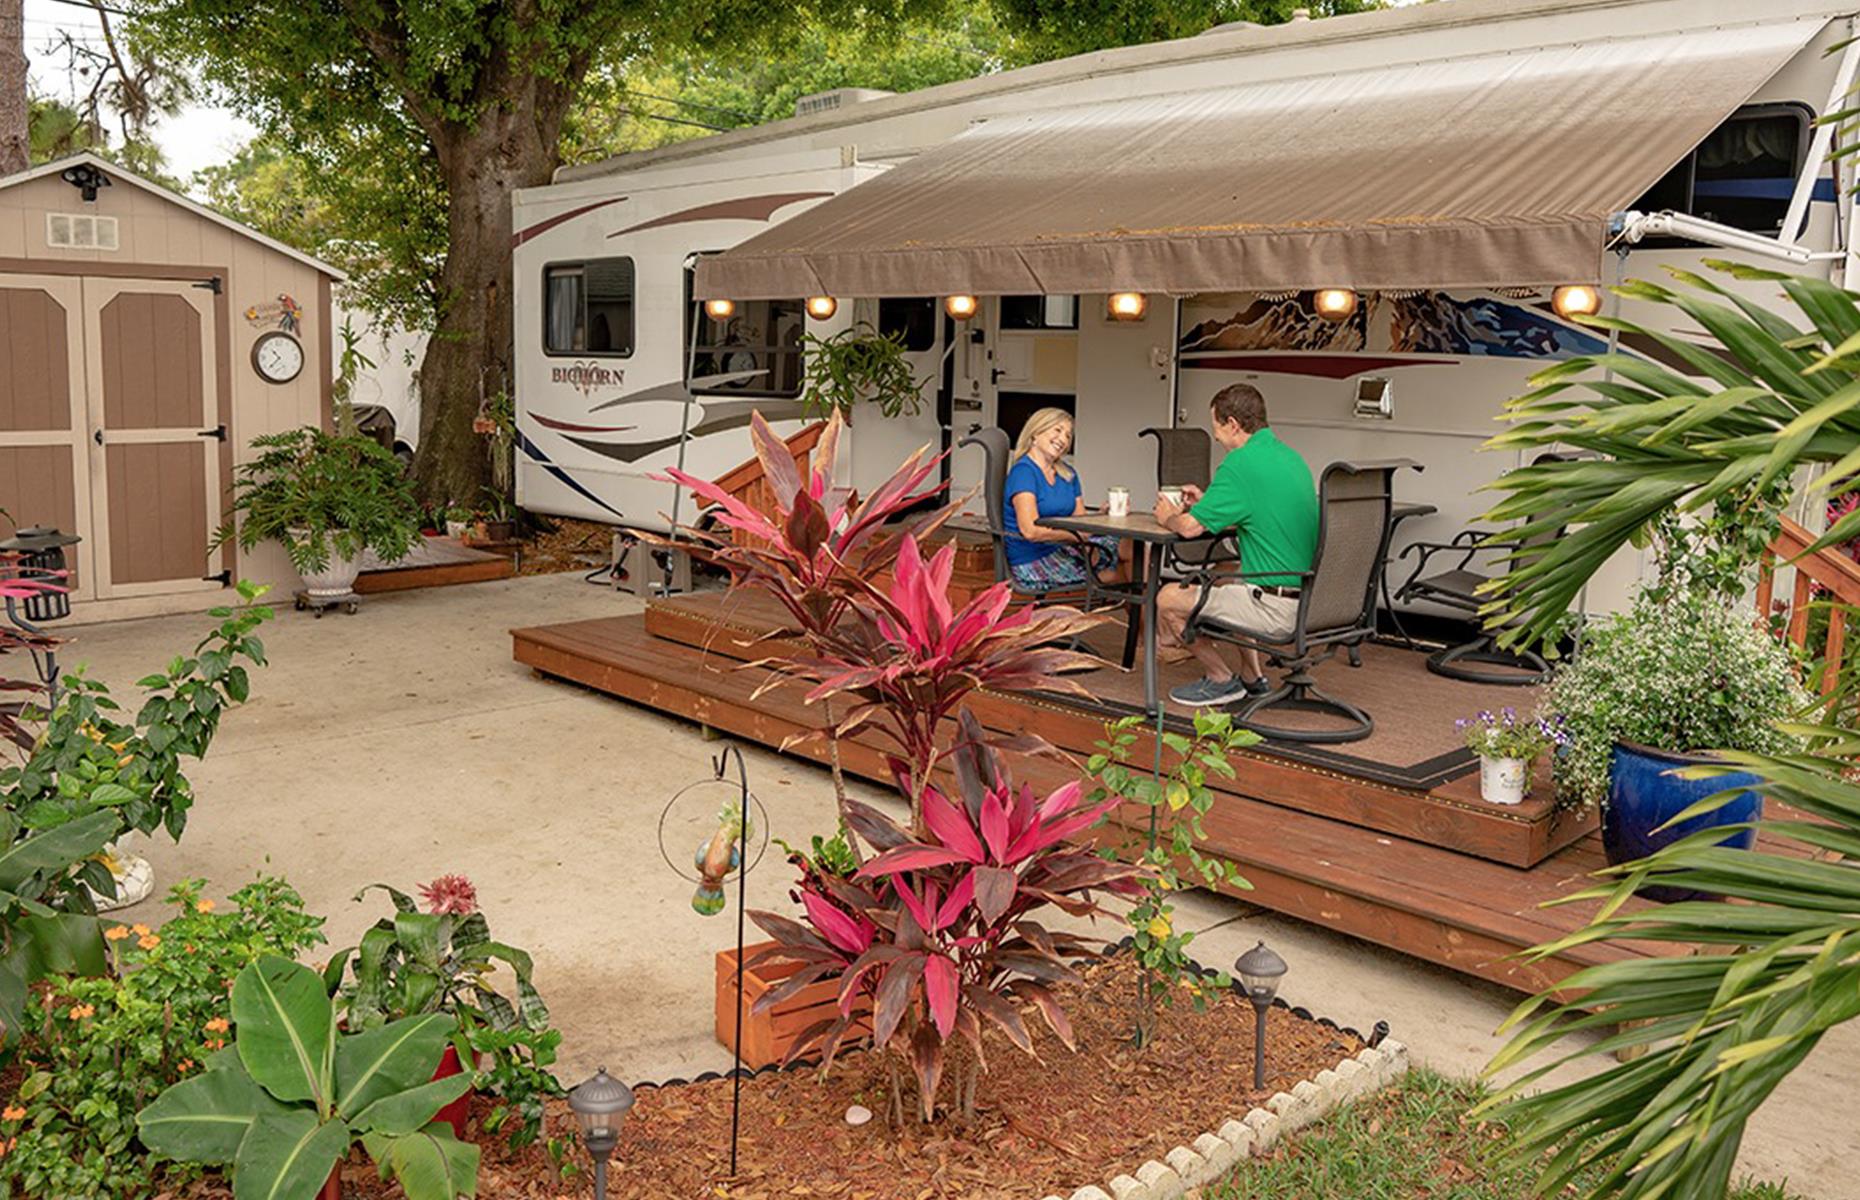 <p><a href="https://www.sunrvresorts.com/resorts/mid-atlantic/new-jersey/seashore/">A Sun RV Resort</a>, this comfortable Cape May site gets top marks for its many amenities. There's a sizeable swimming pool and lake (open with limitations since 26 June), spacious RV lots with full hook-up, mini golf and sports courts too. A packed roster of events (with social distancing measures in place) has also now restarted with everything from arts and crafts to scavenger hunts to boot. </p>